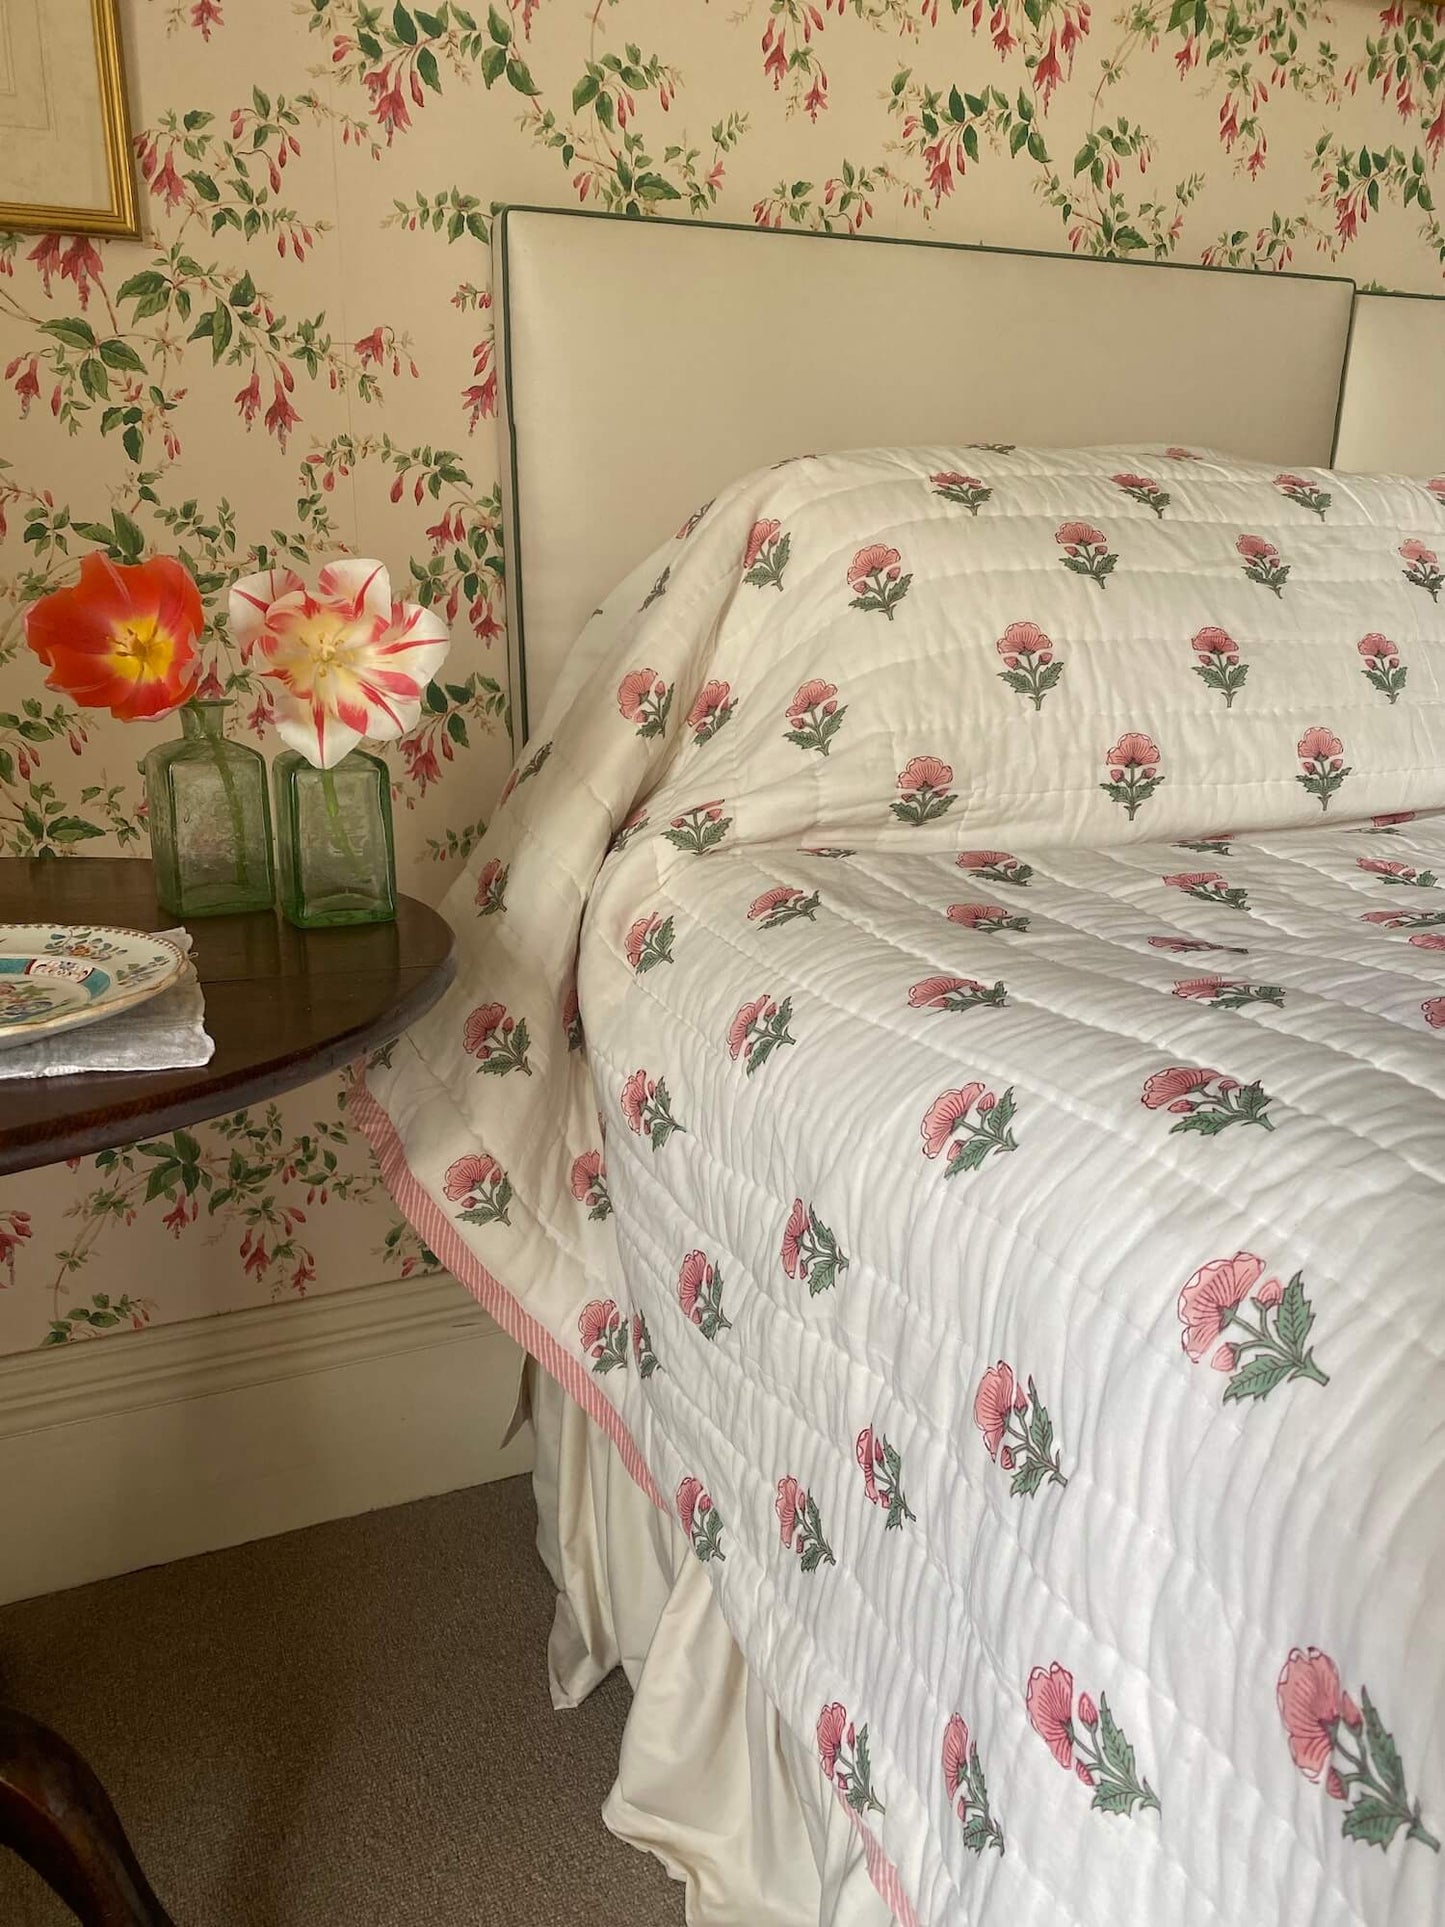 Flower pattern bespoke bed quilts next to antique table with fresh flowers